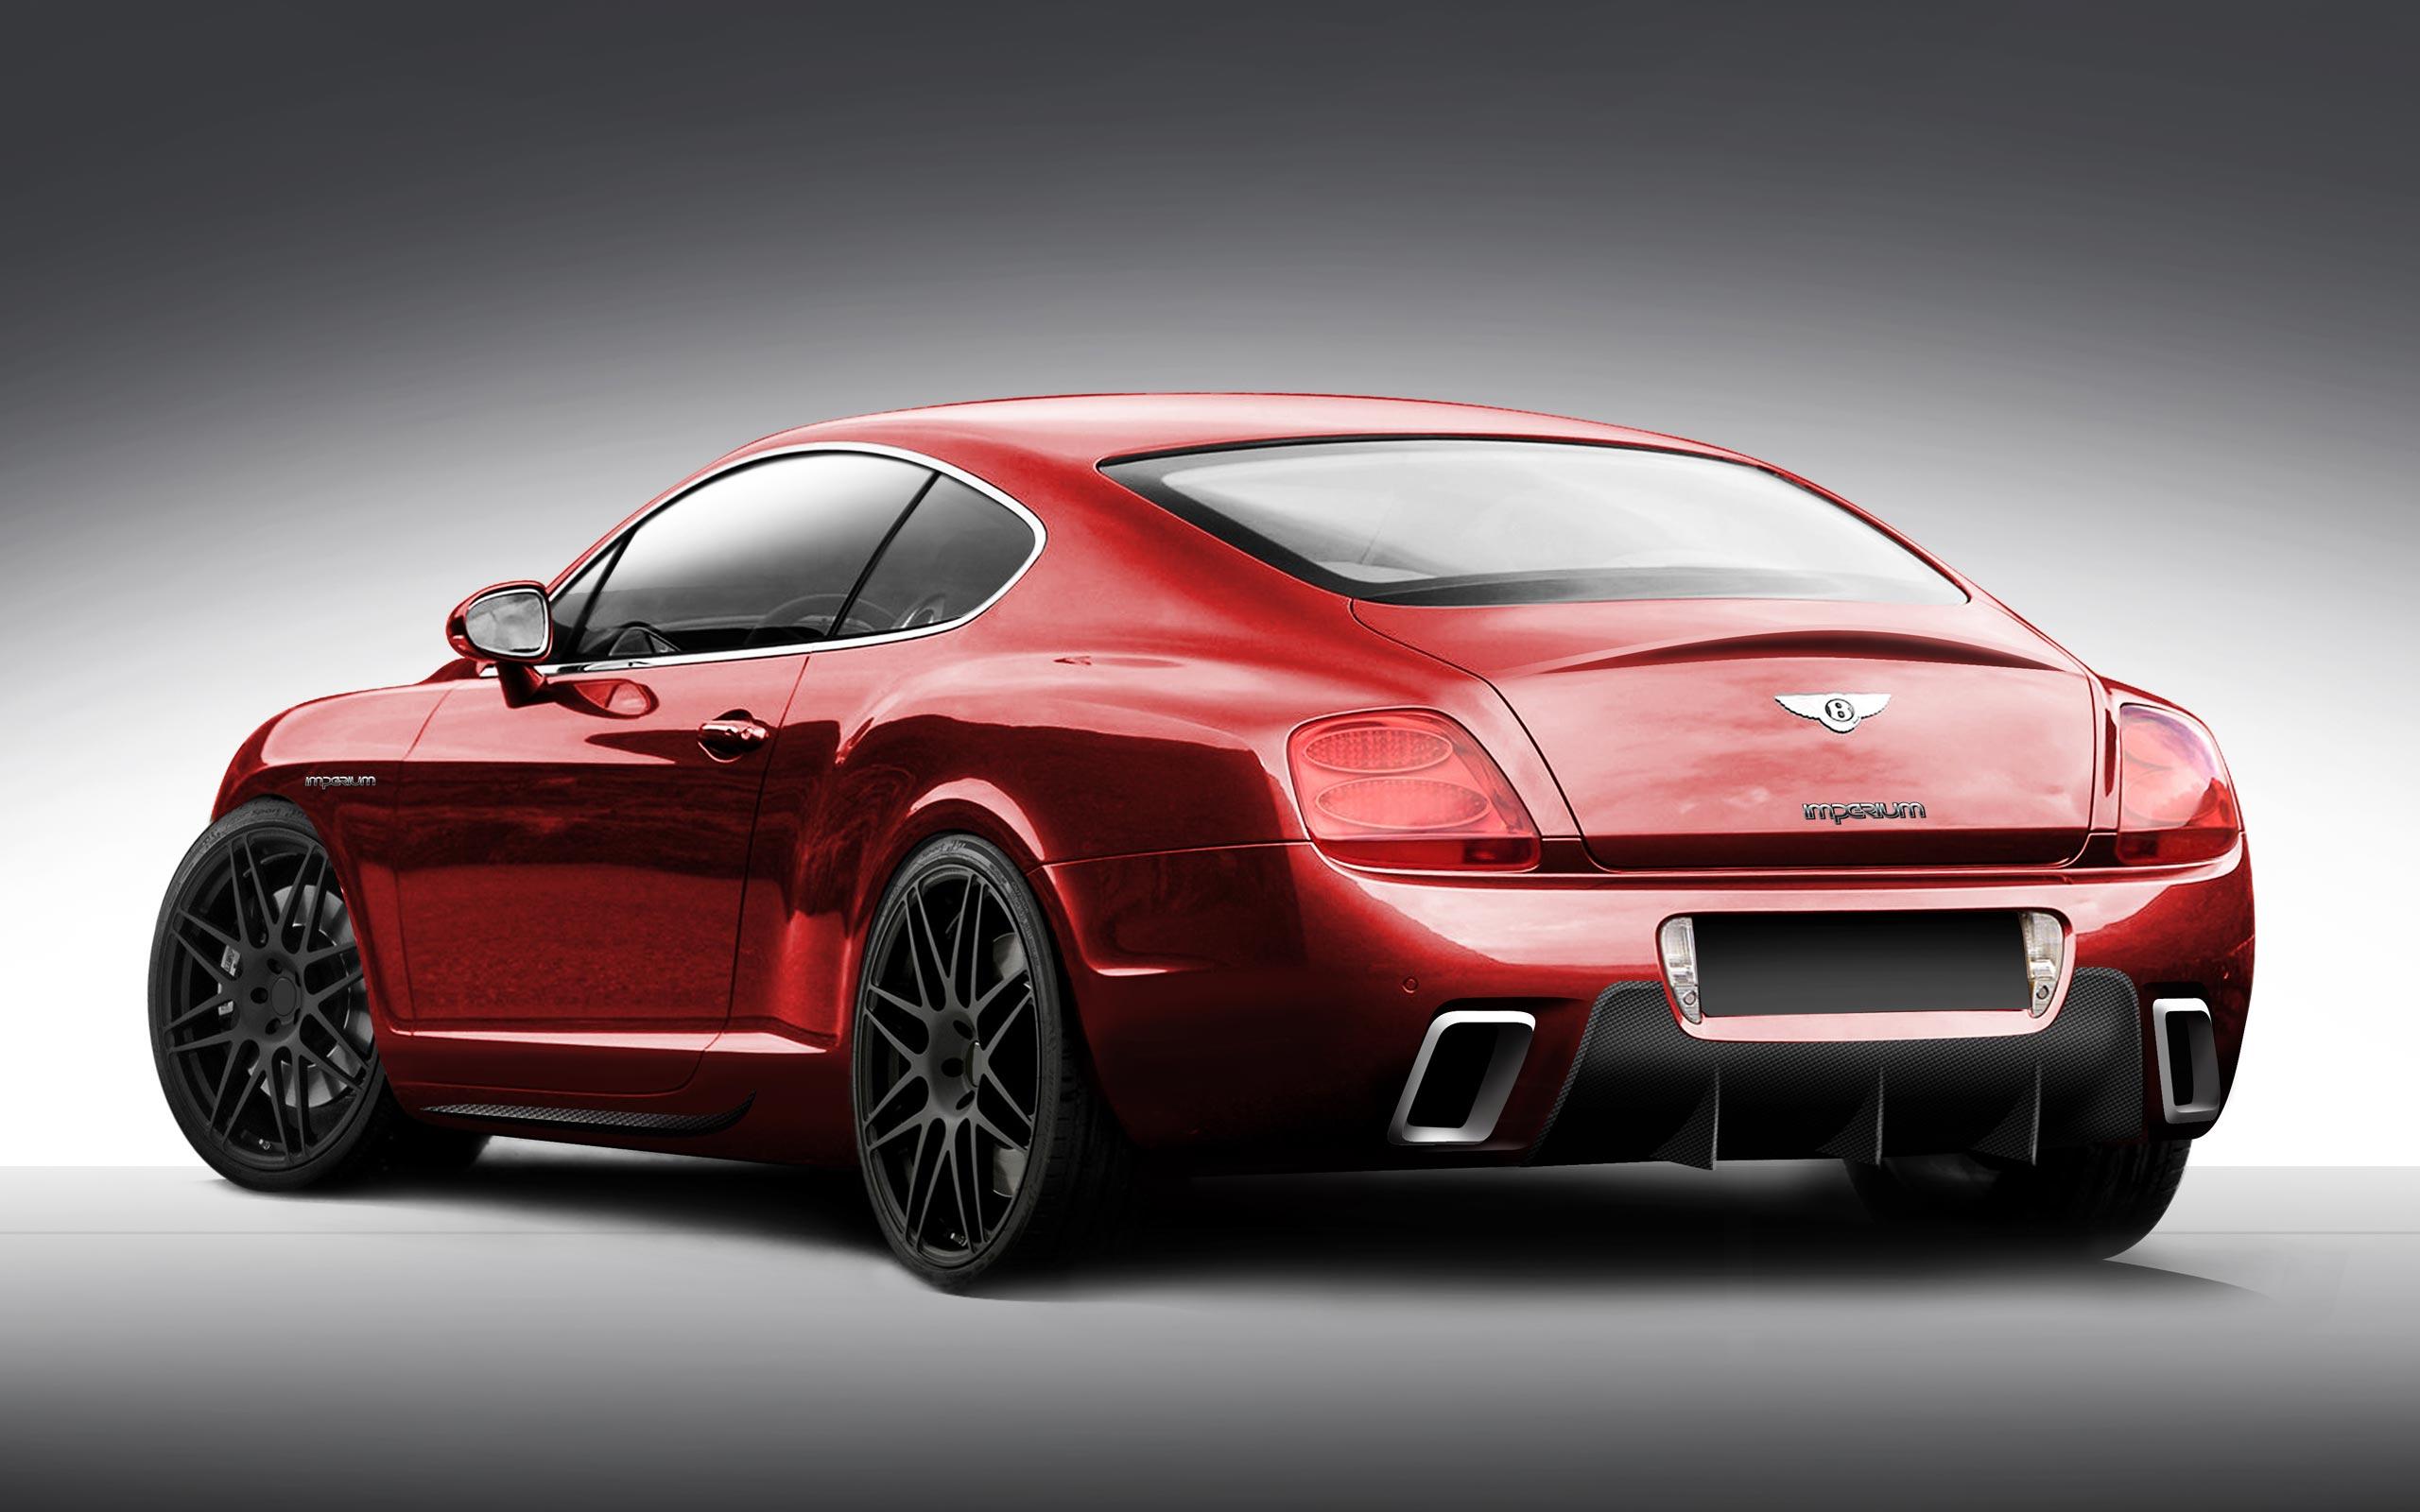 Bentley Wallpapers and Photos In High Quality For Download, B